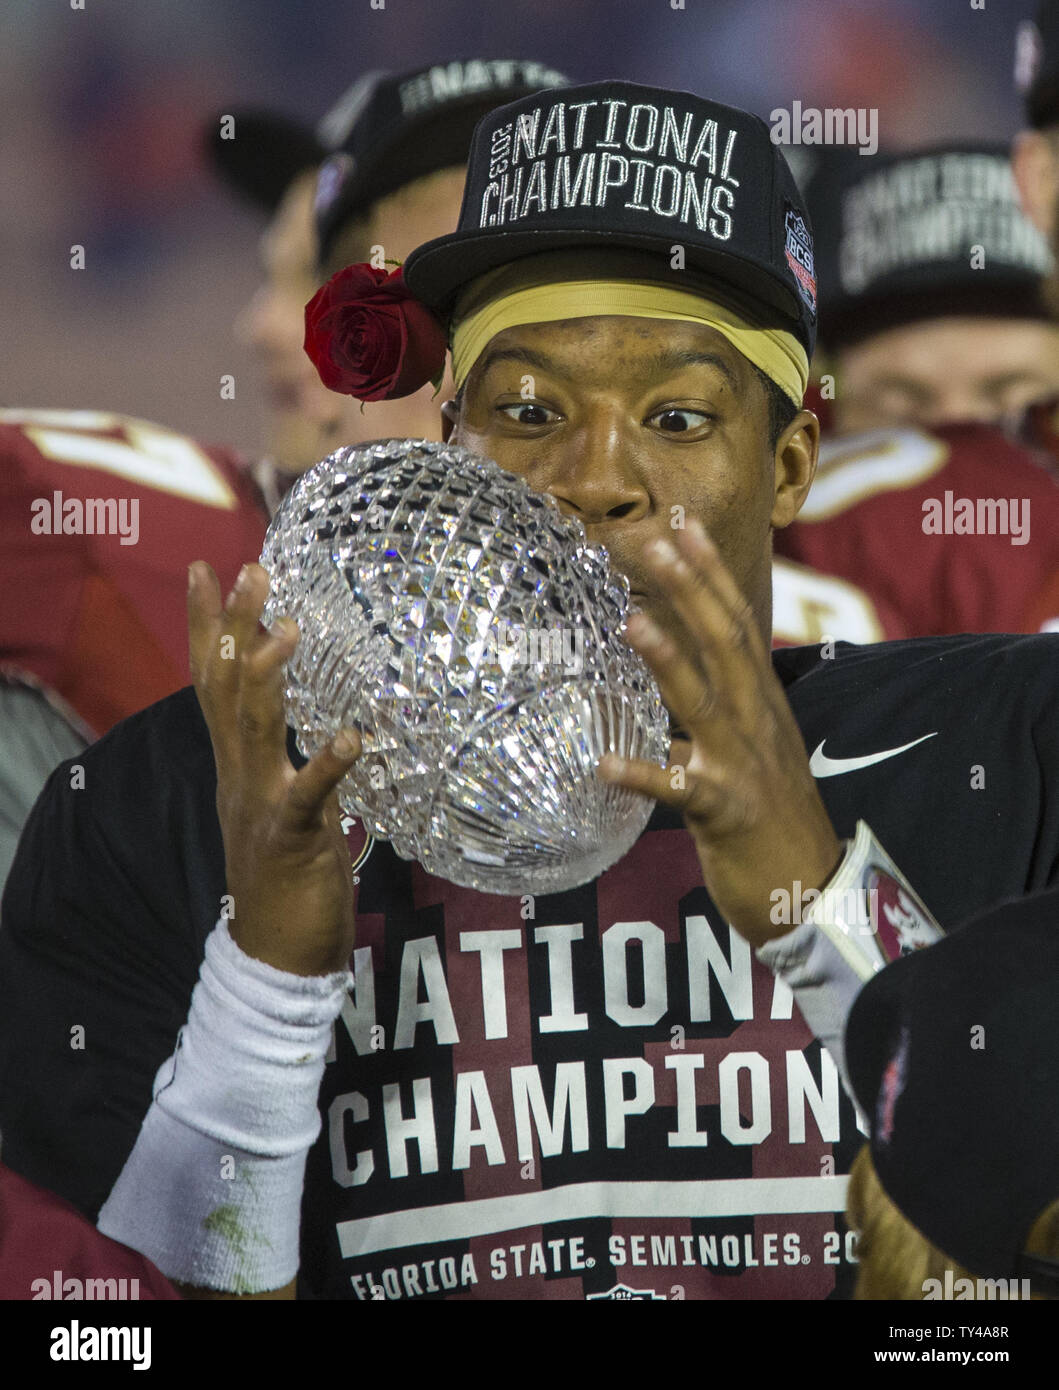 FSU freshman Heisman quarterback Jameis Winston looks at the crystal football after winning the national championship on his birthday and the offensive MVP at the BCS national title game at the Rose Bowl in Pasadena, California on January 6, 2014.  Florida State Seminoles defeated the Auburn Tigers 34-31 for the title.  UPI/Mark Wallheiser Stock Photo